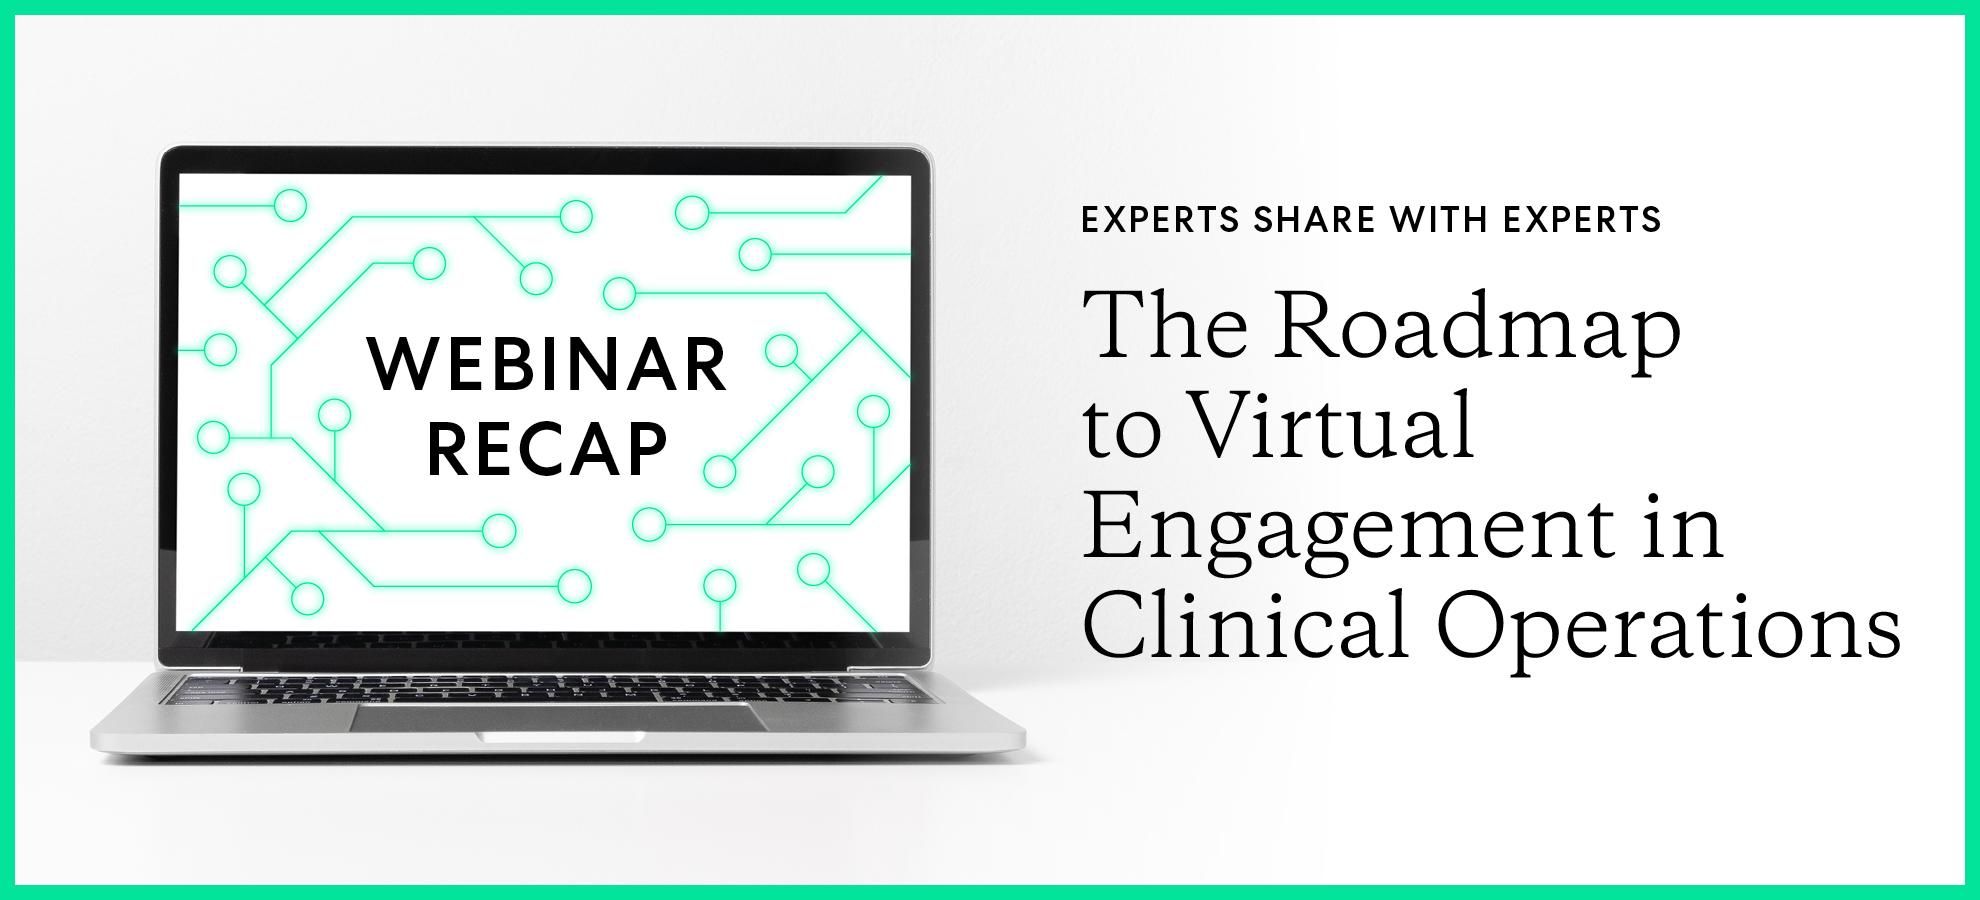 The roadmap to virtual engagement in clinical operations